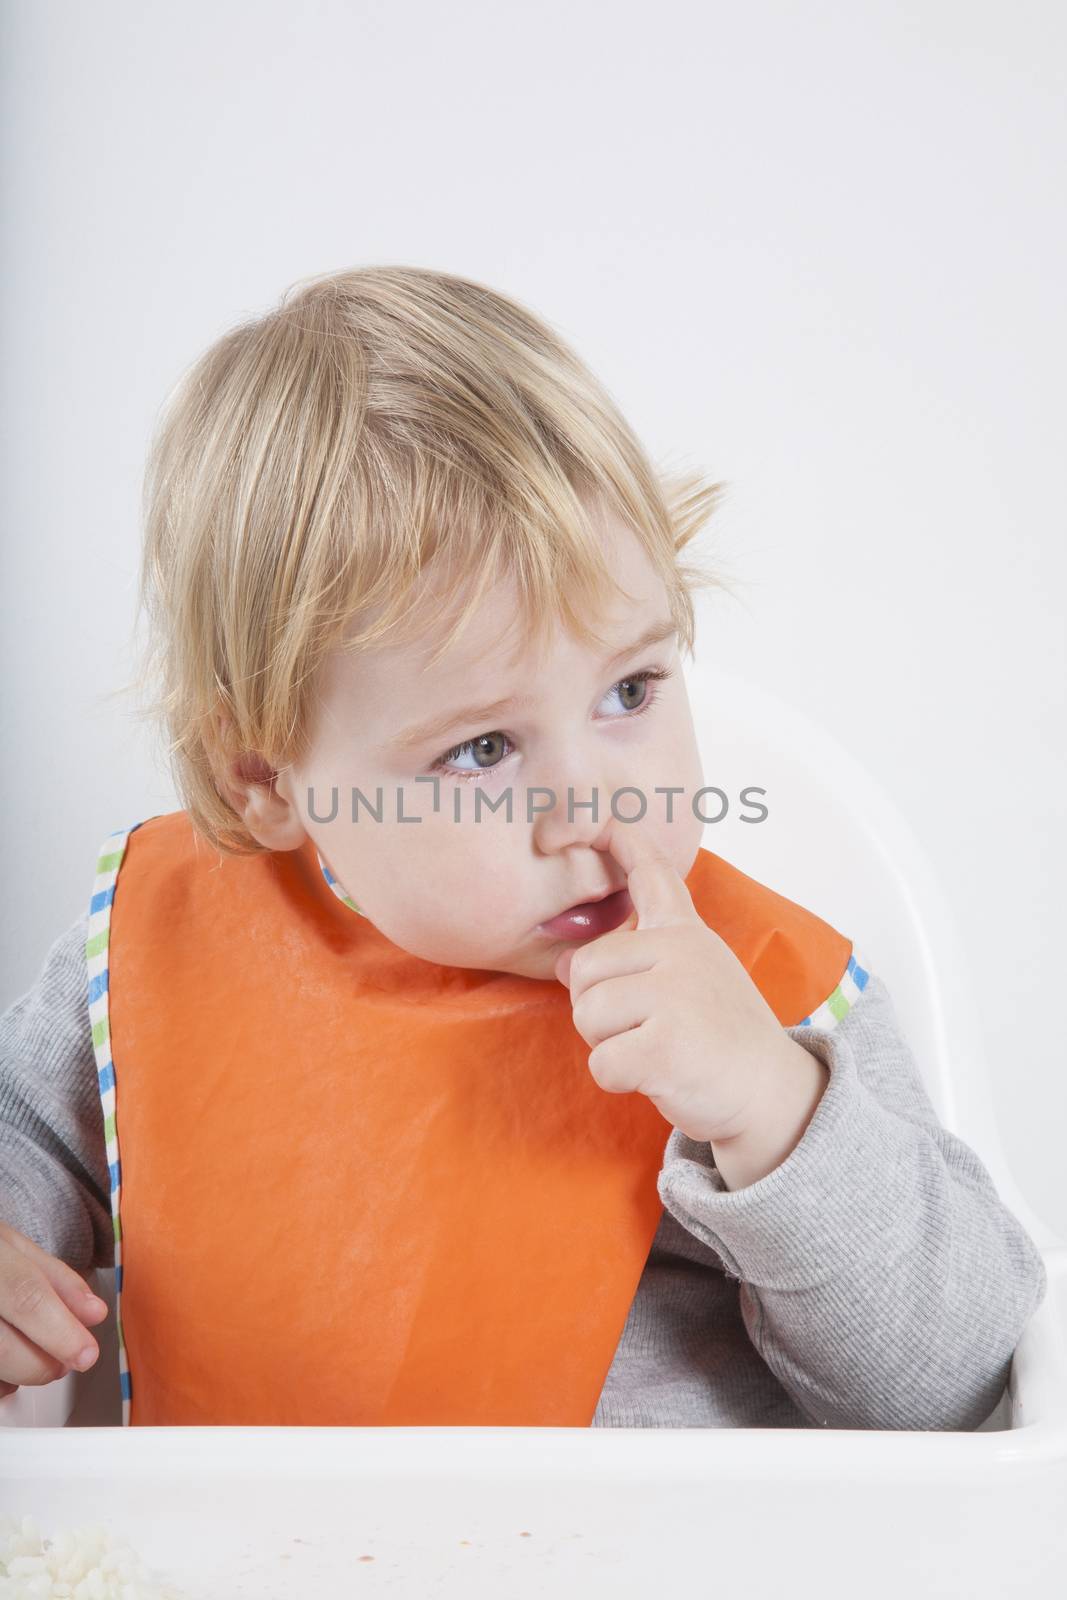 blonde caucasian baby seventeen month age orange bib grey sweater sitting on white high-chair eating with finger picking nose